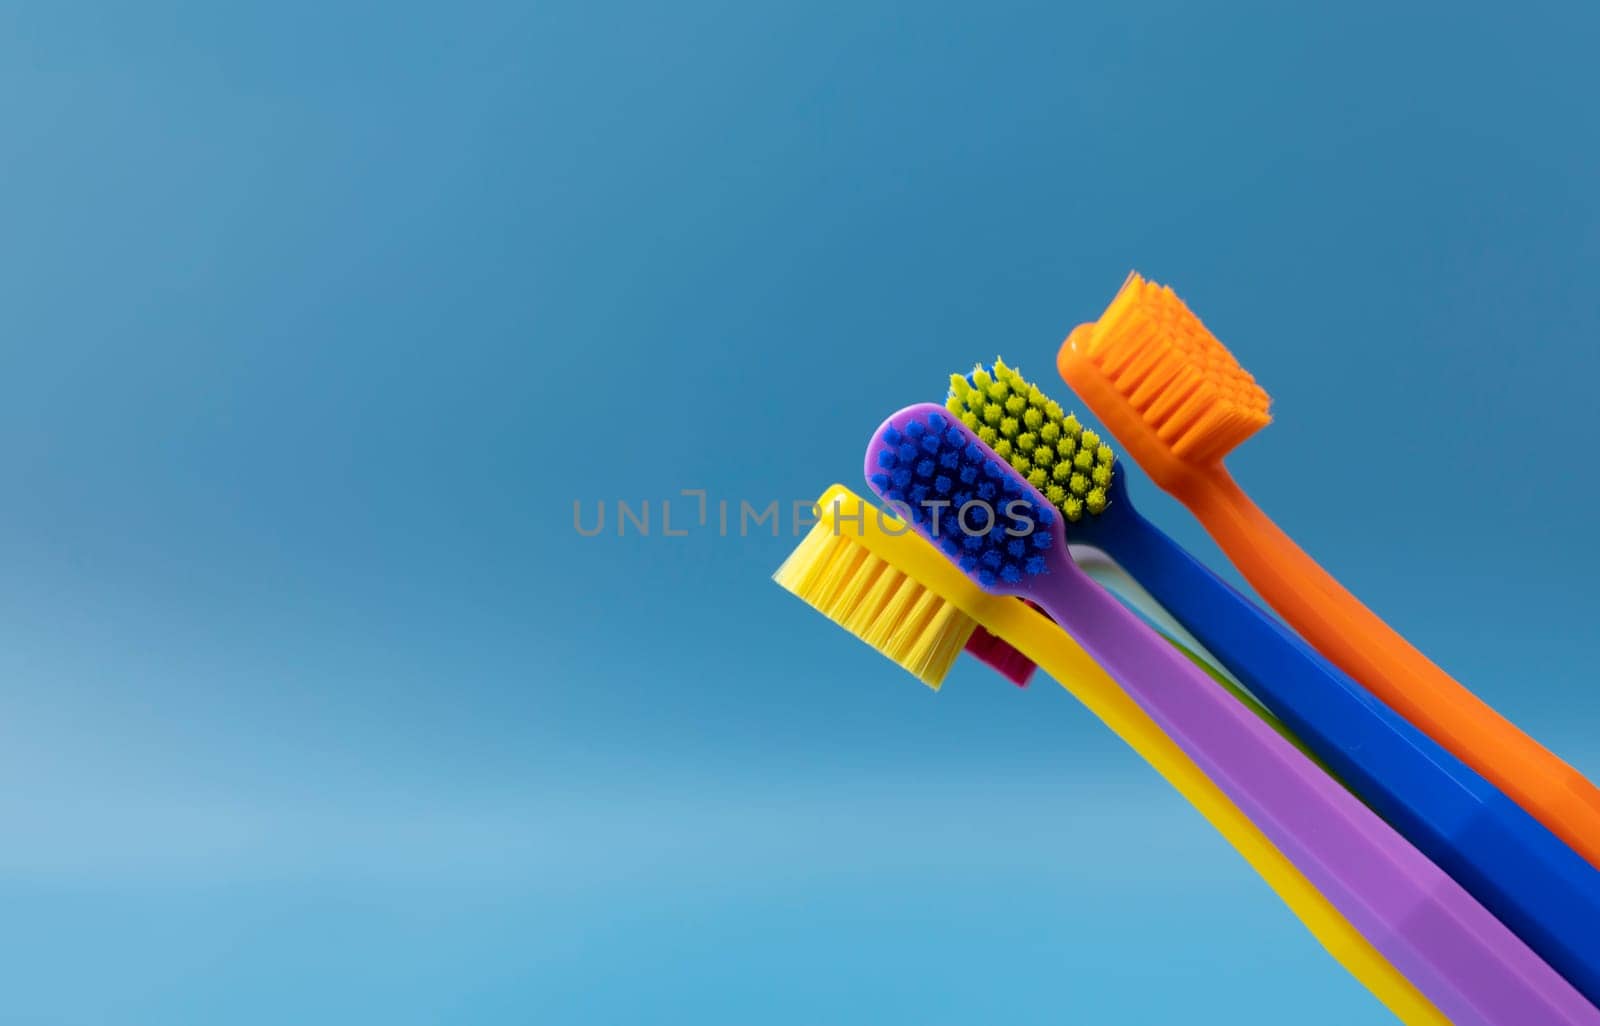 Design Bunch Of Colorful Toothbrushes on Blue Background. Oral Hygiene, Dental Care, Heathy Tooth And Smile. Copy Space For Text. Sustainable Mouth Product. Horizontal Plane by netatsi